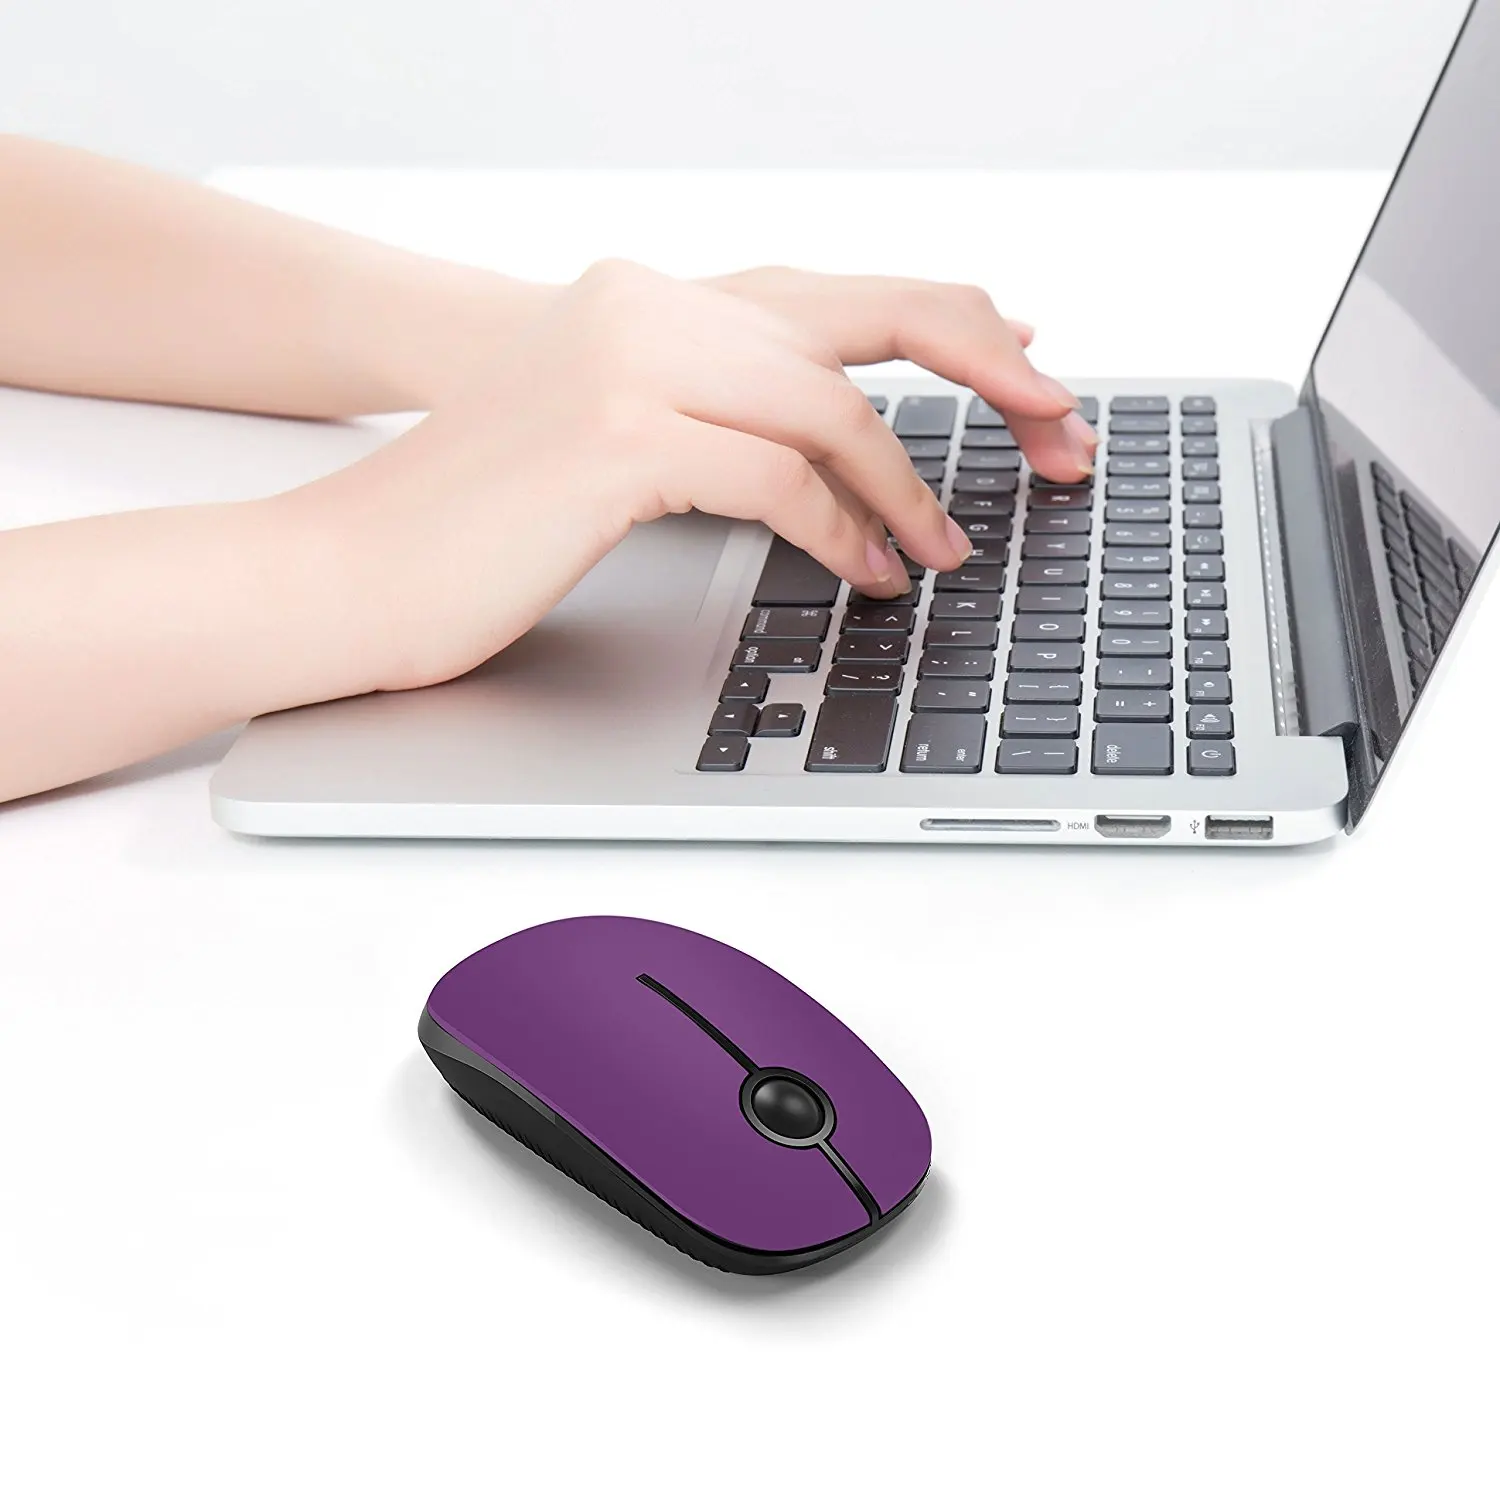 best wireless mouse Jelly Comb 2.4G Slim Mouse Wireless with Nano Receiver Portable Optical Noiseless Mice for Notebook PC Laptop Computer MacBook mouse computer mouse